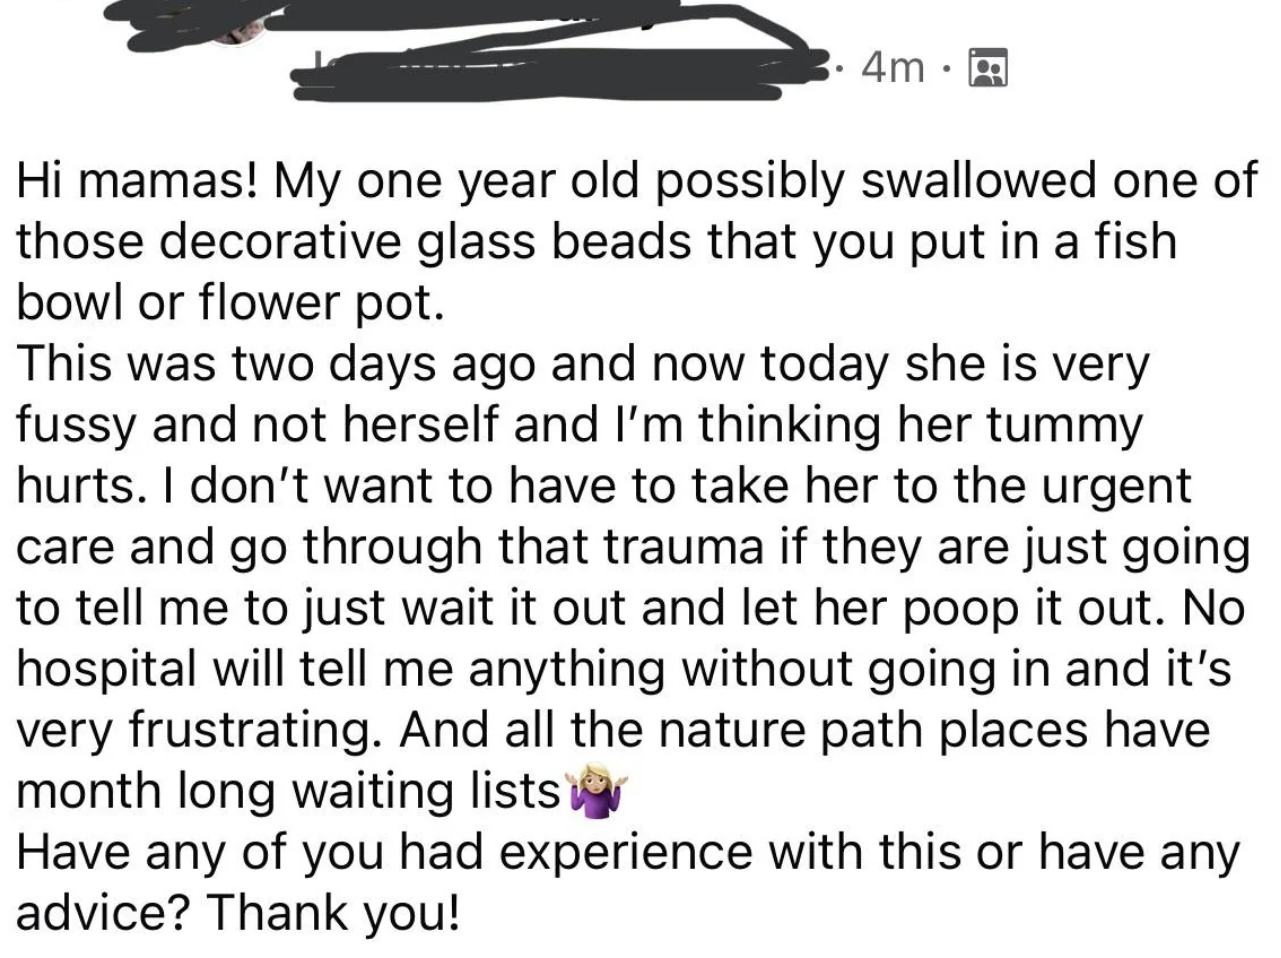 &quot;I don&#x27;t want to have to take her to the urgent are and go through that trauma if they are just going to tell me to just wait it out and let her poop it out.&quot;